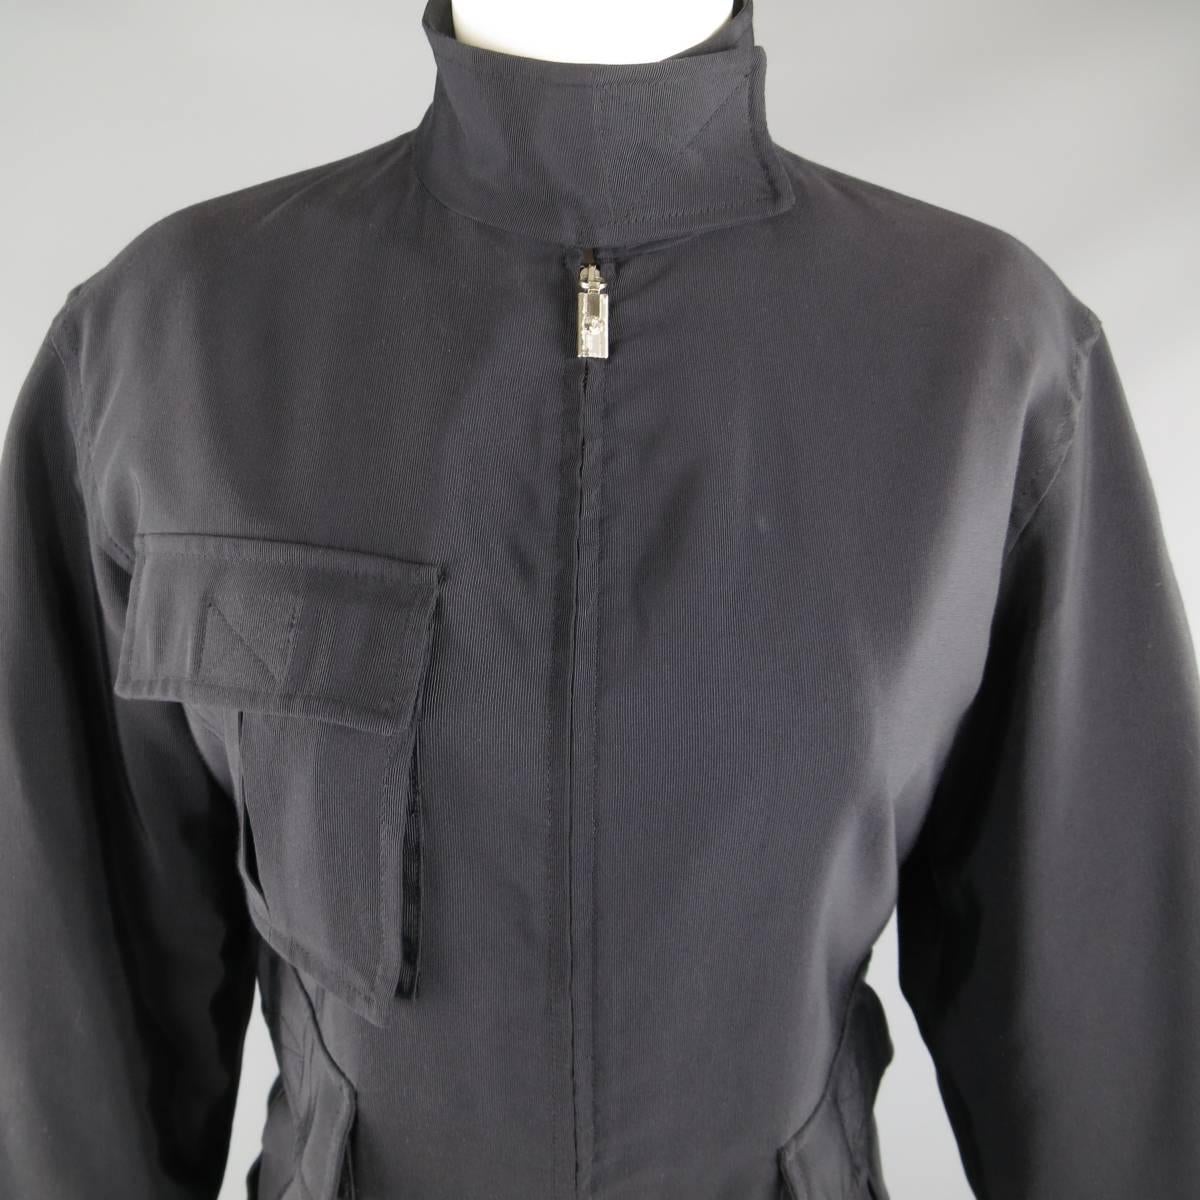 Vintage 1990's GIANNI VERSACE military style jacket comes in a black cotton rayon twill and features a high collar with velcro closure, zip front with silver tone logo tab, and triple patch flap pockets with asymmetrical hem. Wear on tab. As-Is.